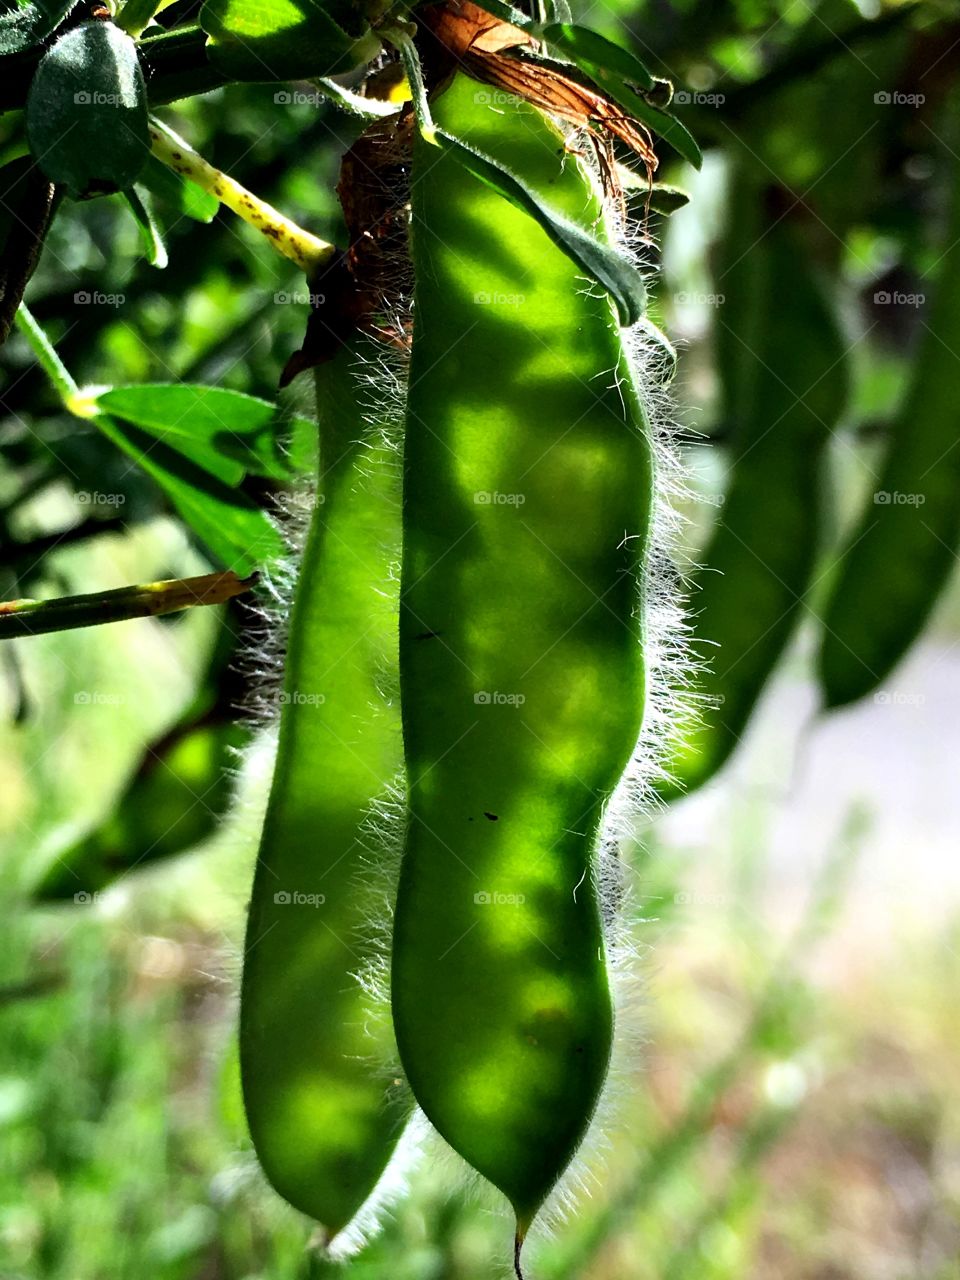 Fuzzy pea pods are almost see through